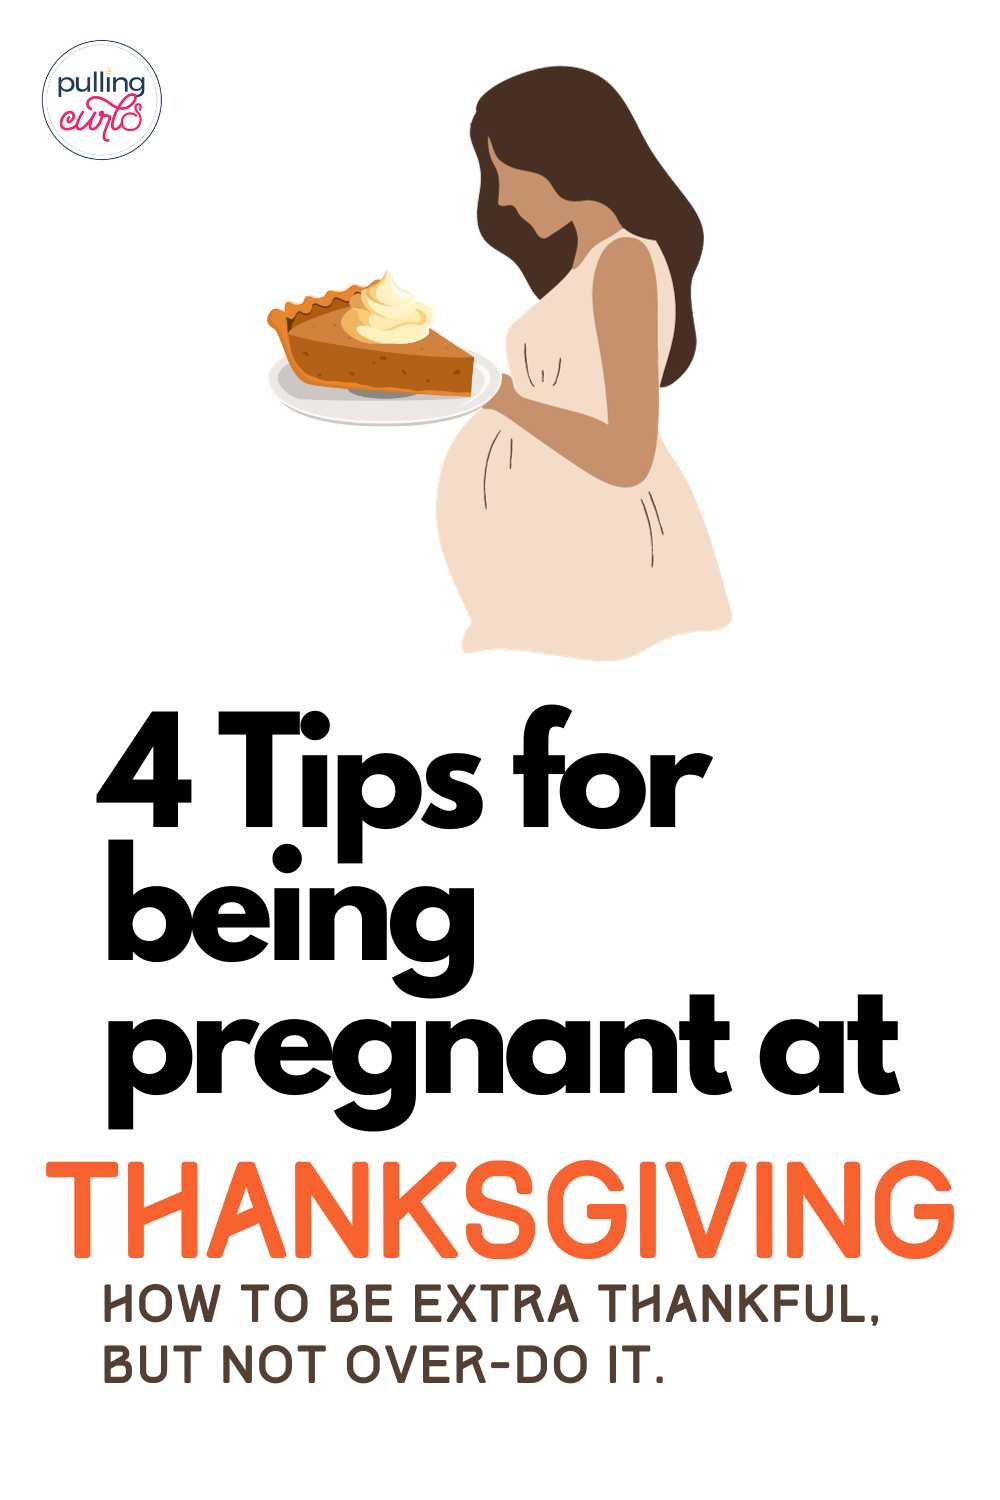 pregnant woman holding pie / 4 tips for being pregnant at Thanksgiving via @pullingcurls